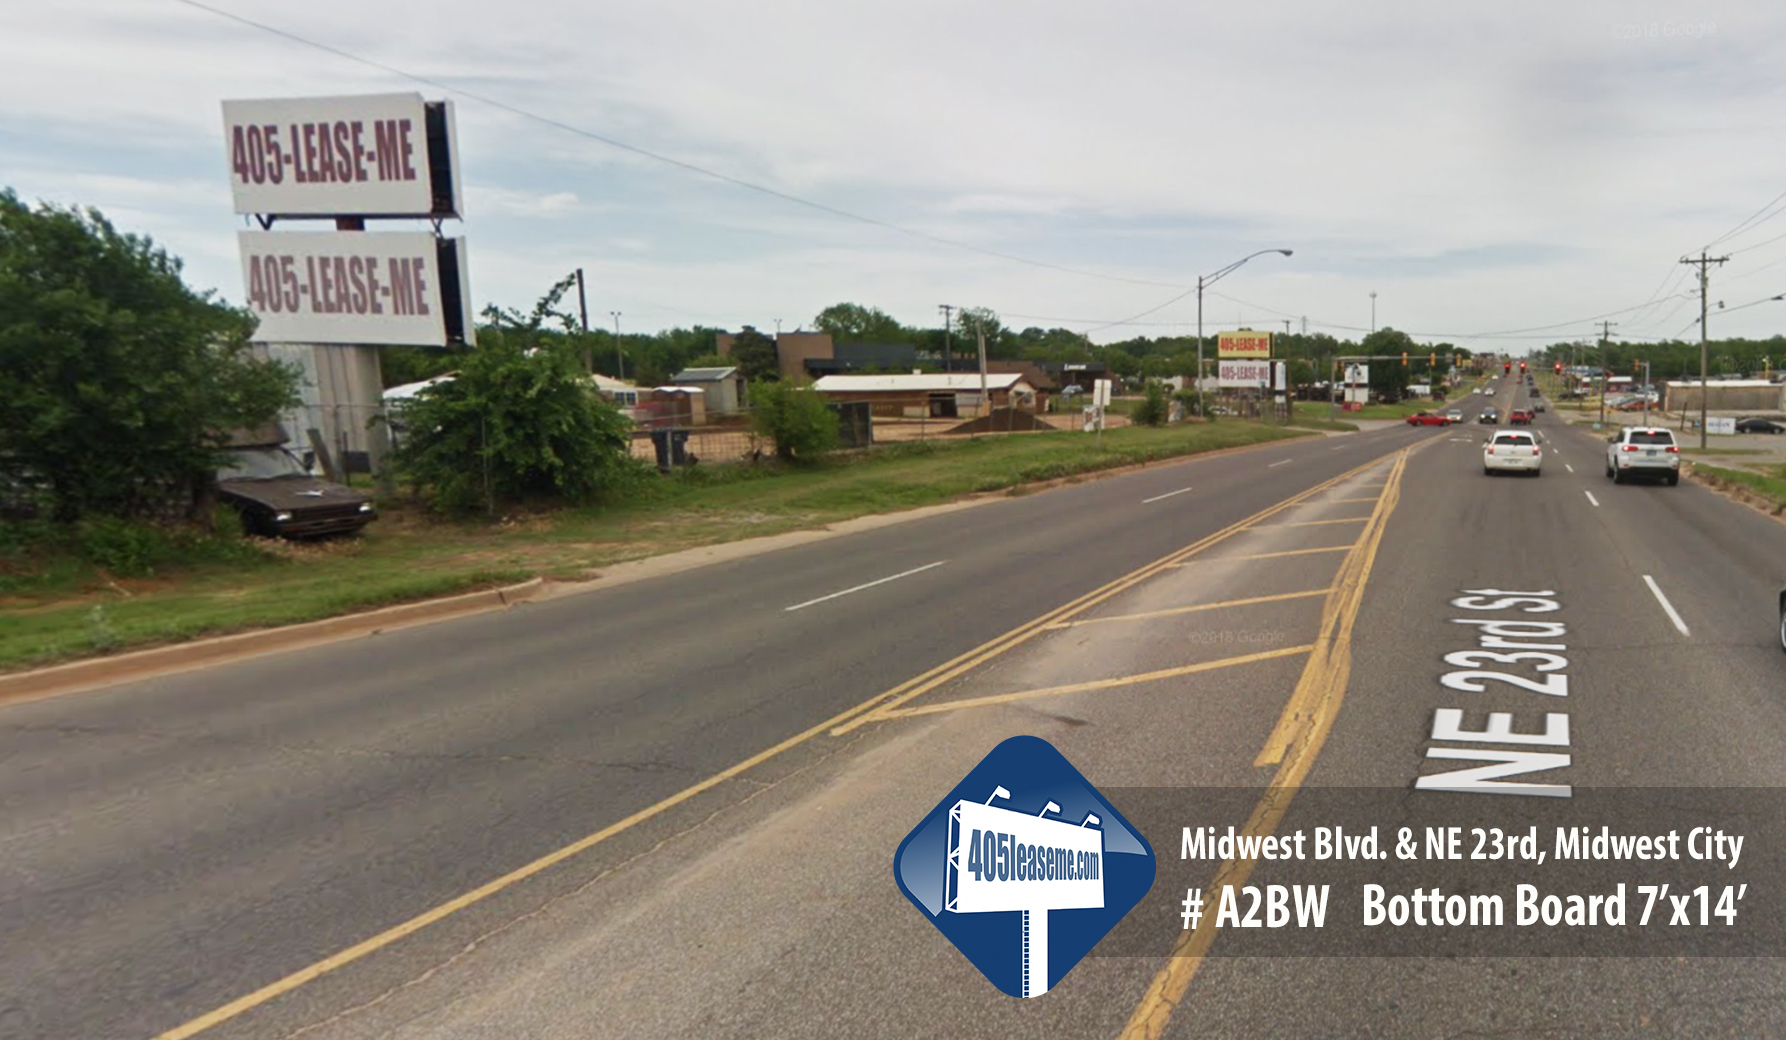 10 Midwest City - A2BW